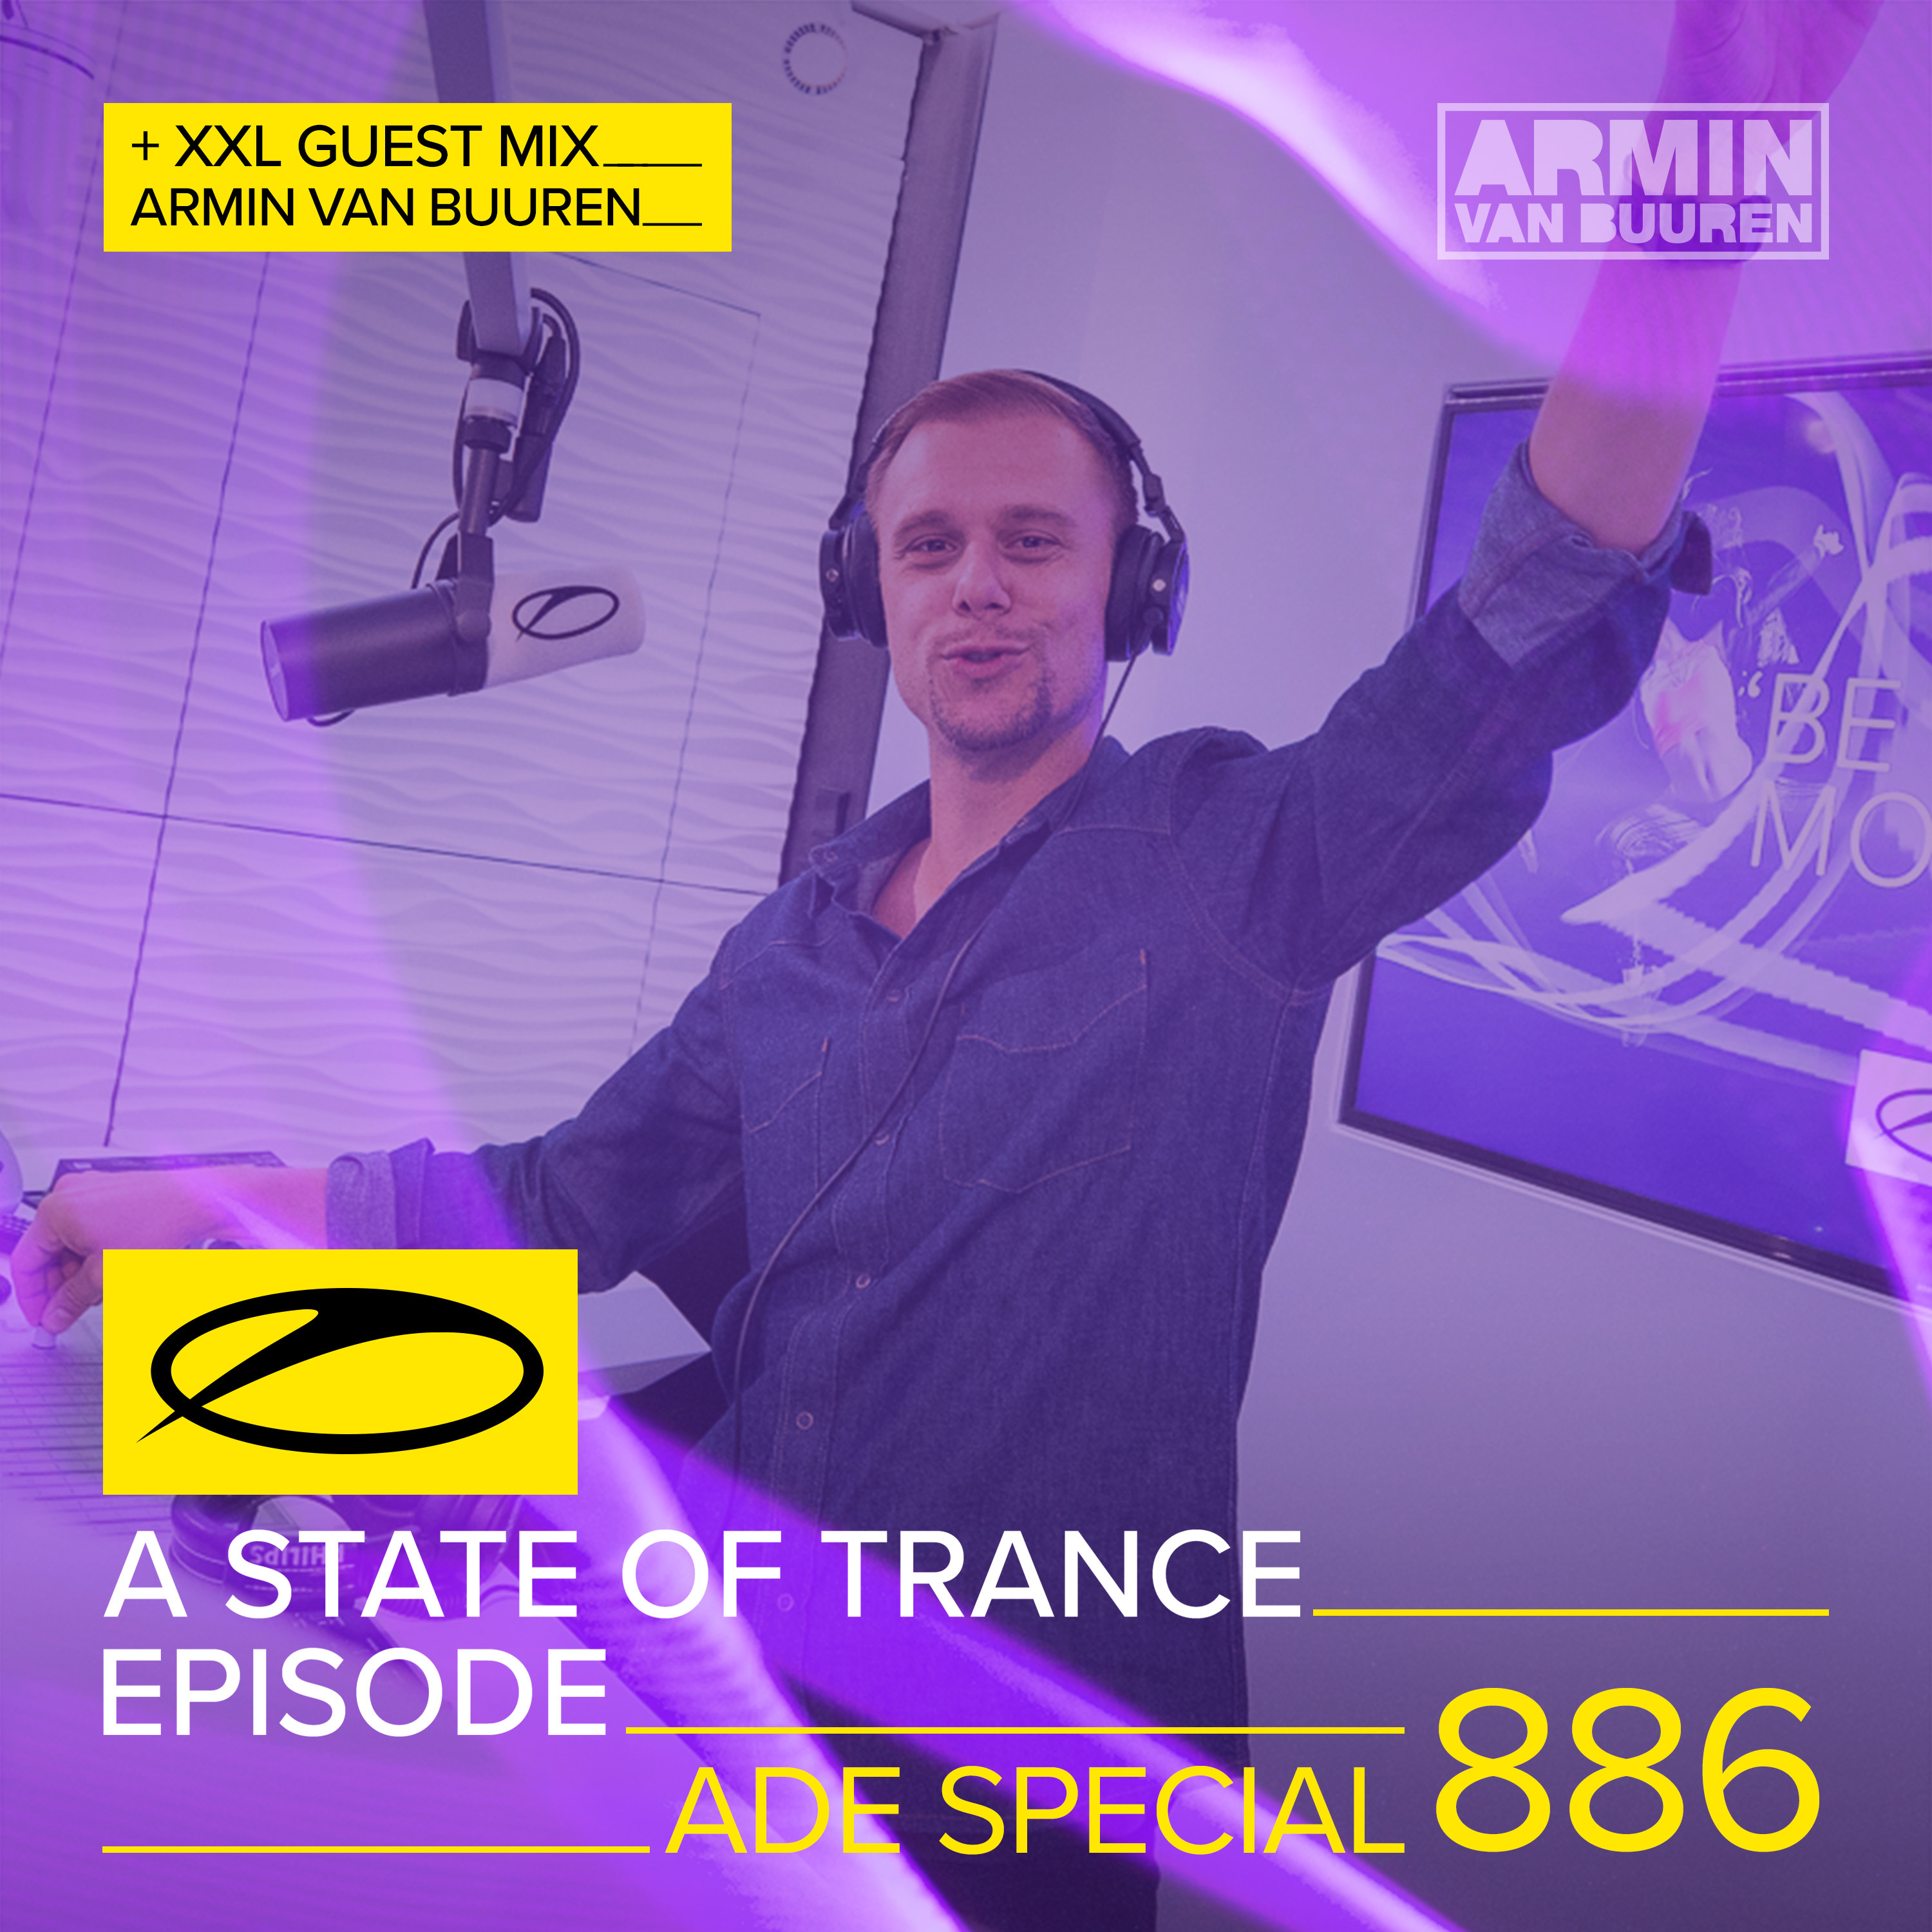 Sound of The Drums (ASOT 886)